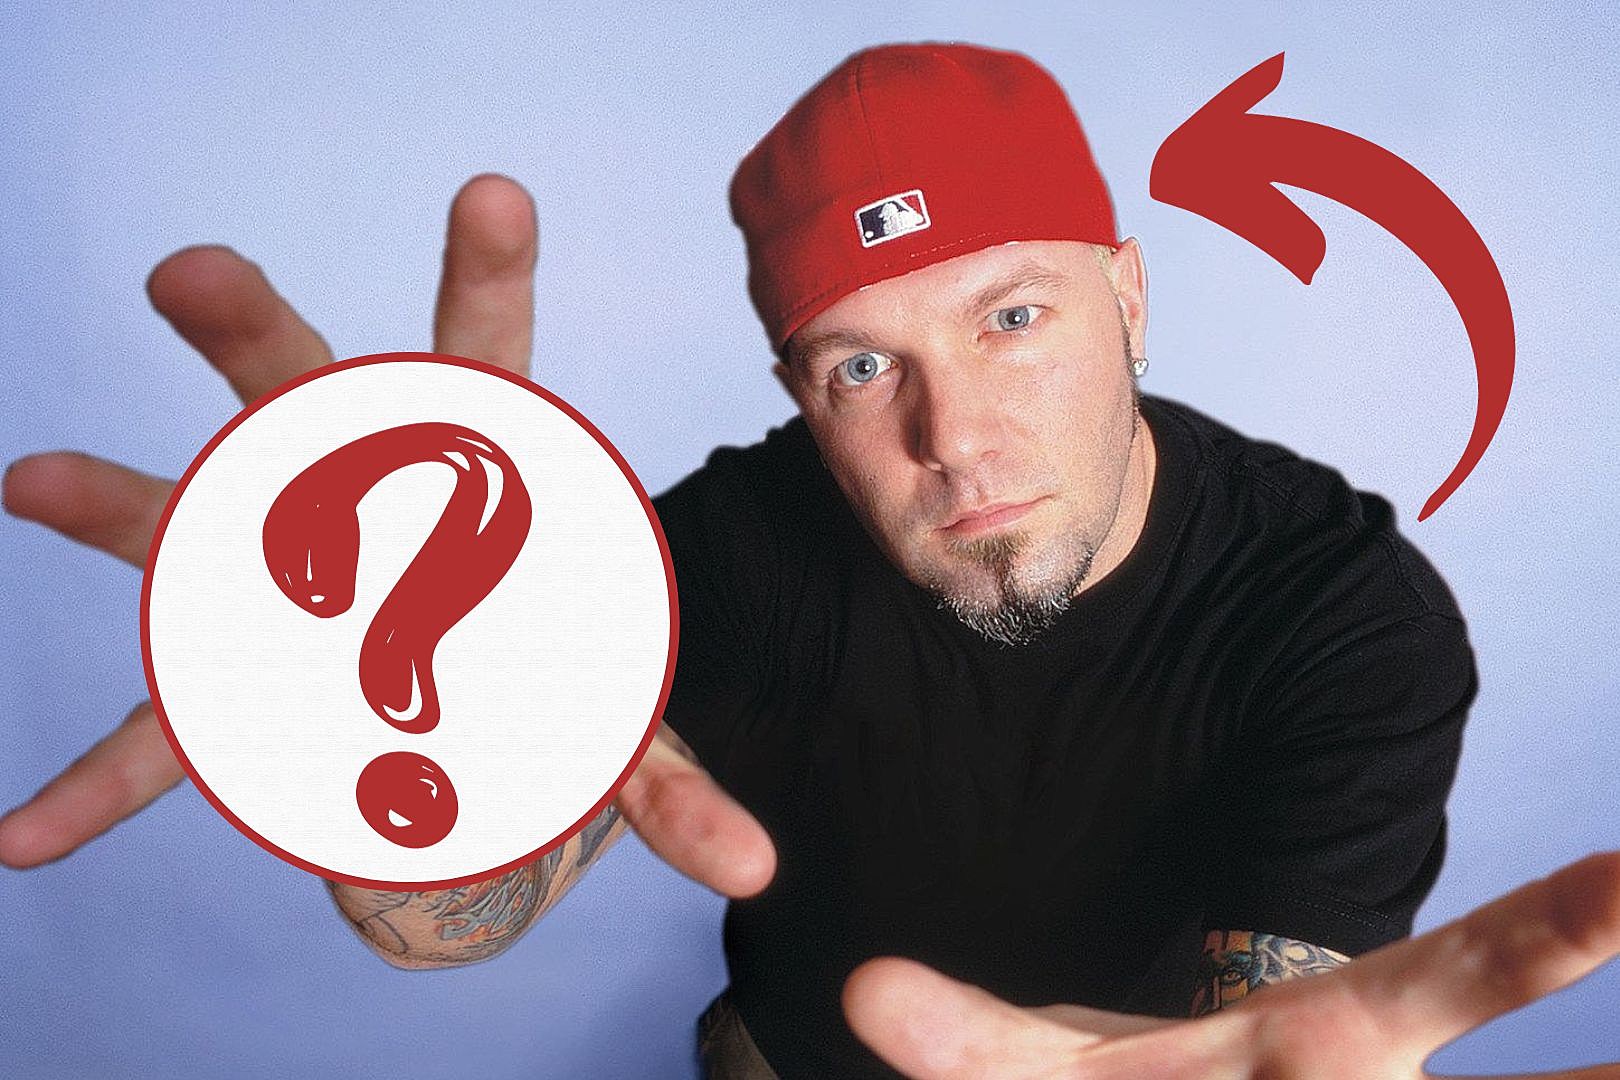 Why Limp Bizkit's Fred Durst Wears a Red New York Yankees Hat